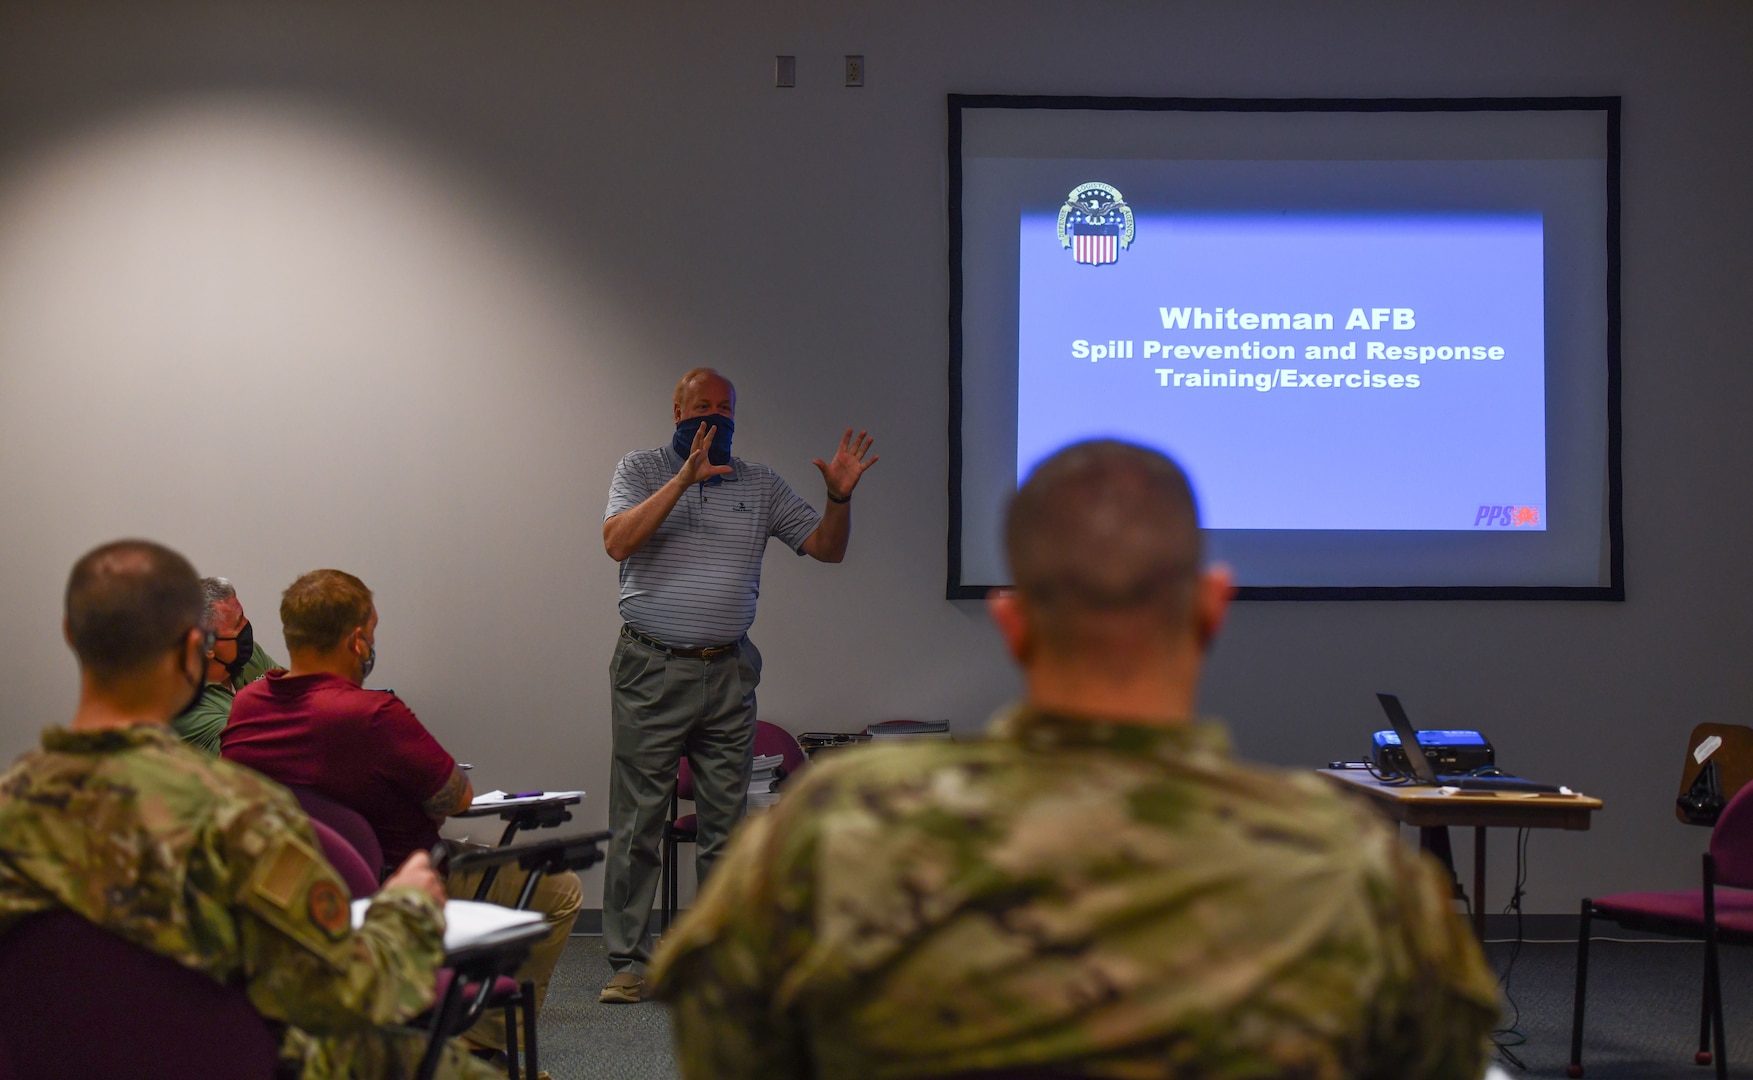 Tracy Taylor, Defense Logistics Agency Energy instructor, gives an introduction to a two-day spill prevention and response training course at Whiteman Air Force Base, Missouri, July 21, 2020. The course reviewed important environmental protection mandates and spill mitigation and emergency response techniques for service members and contractors who frequently handle or transport petroleum fuels or other hazardous materials on the installation. DLA instructors visit various installations to oversee training and exercises to ensure compliance with federal safety and environmental protection regulations. (U.S. Air Force photo by Tech. Sgt. Alexander W. Riedel)